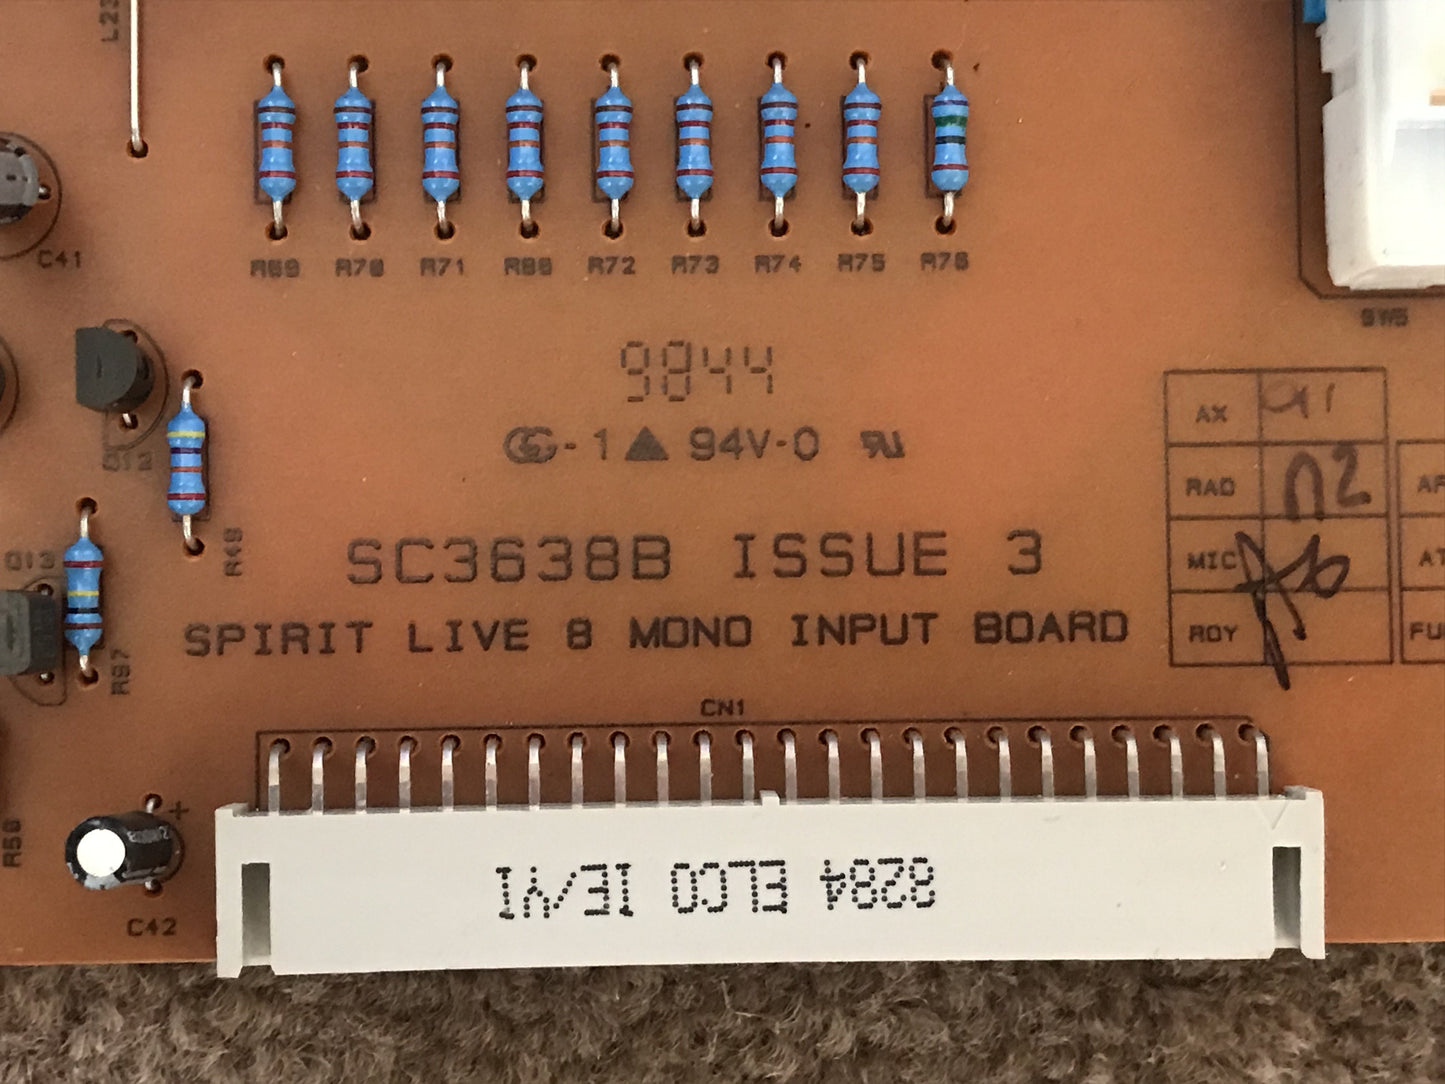 Soundcraft Spirt live 8 input pcb SC3638B Issue 3 and 5